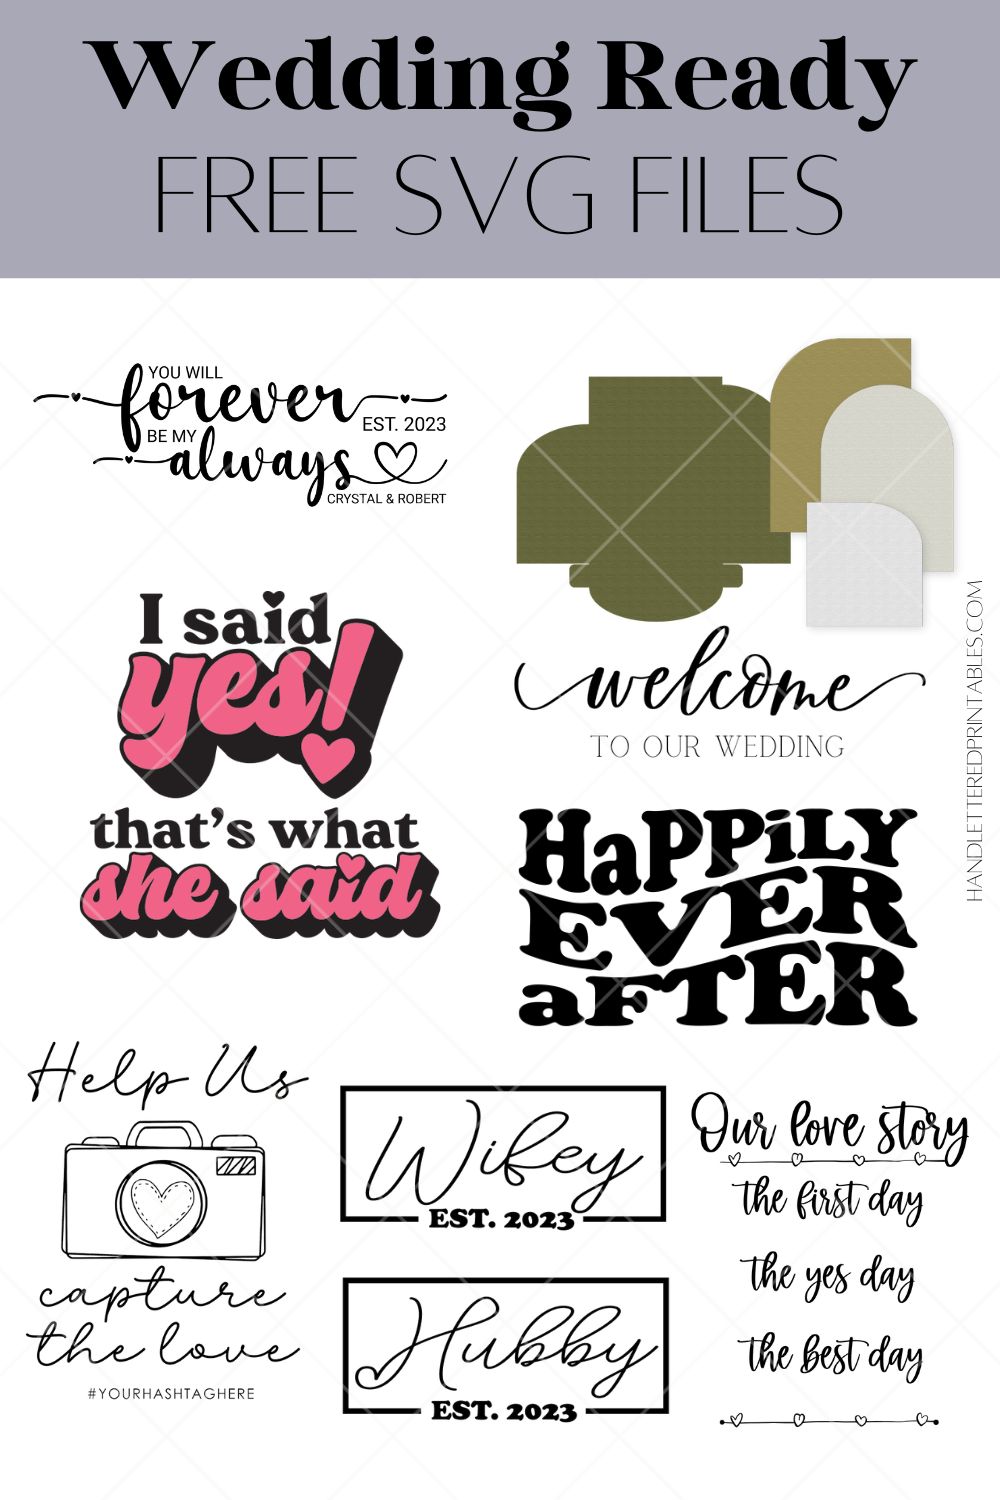 Free wedding SVG files (collage of all files)